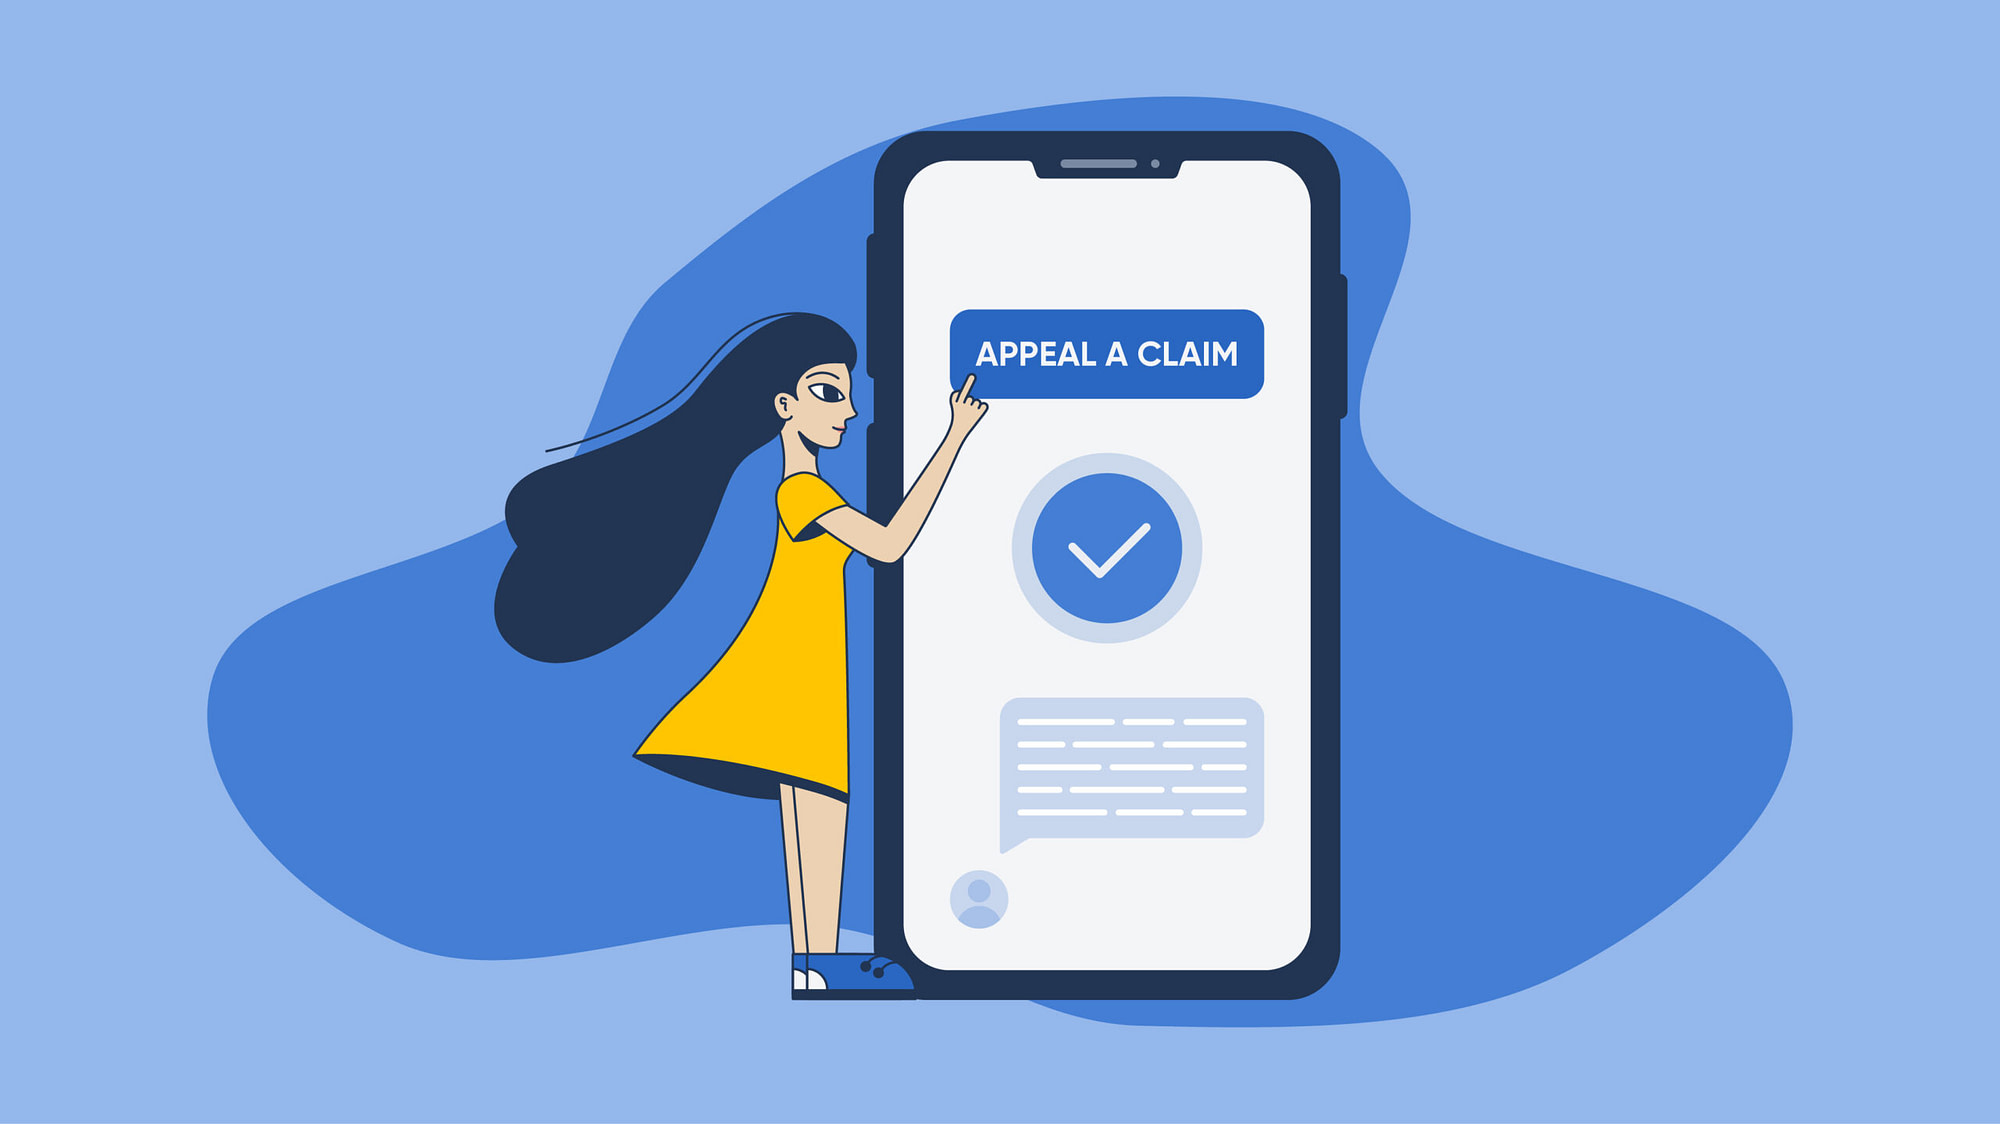 How to appeal a denied medical claim